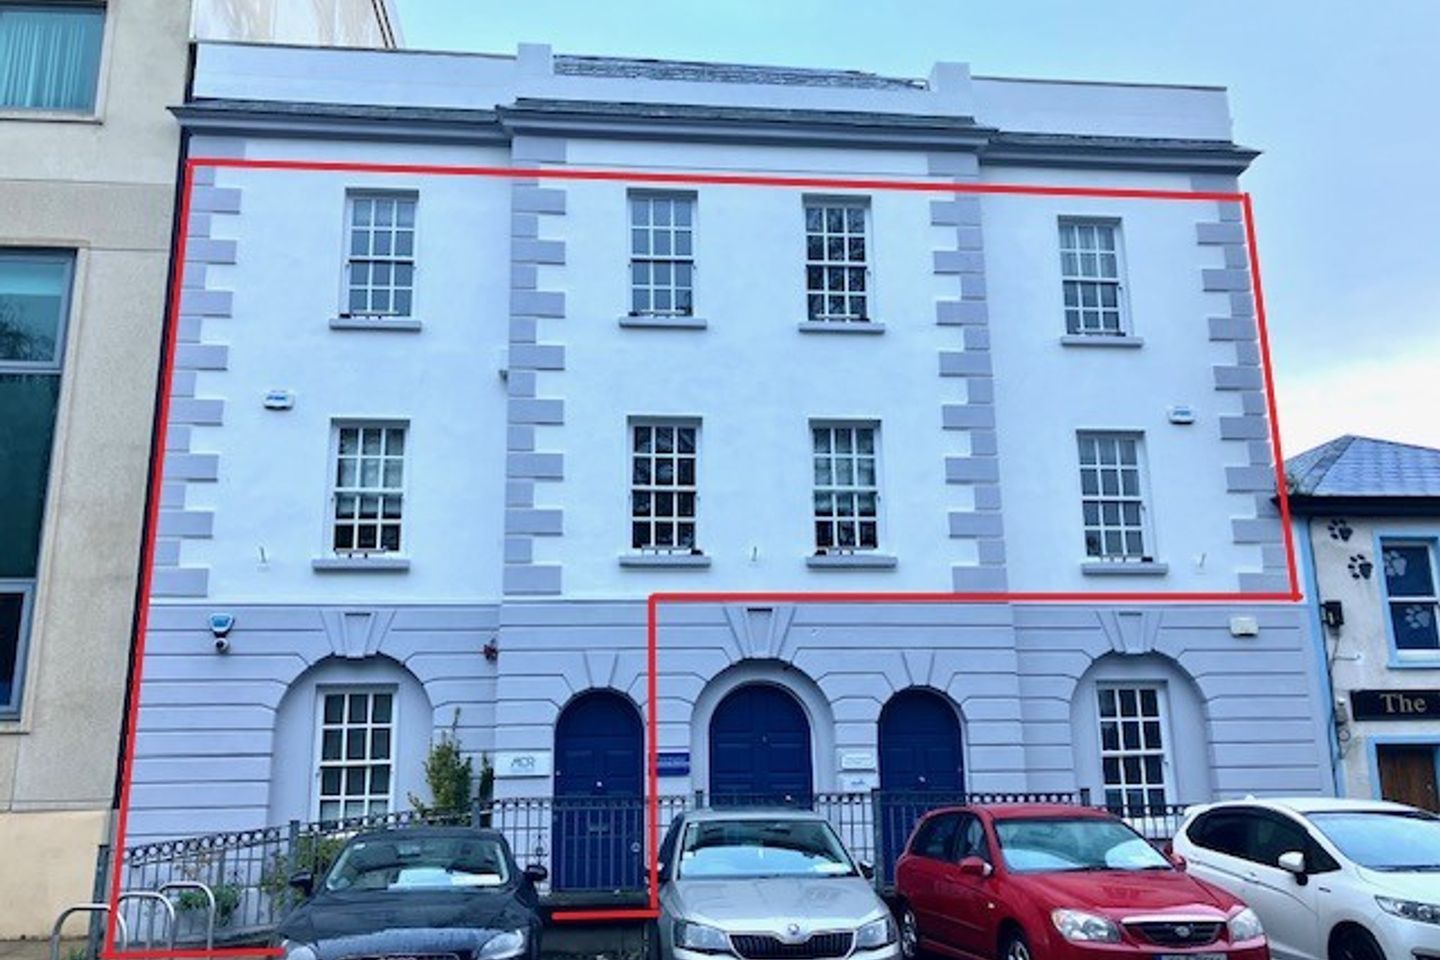 3-4 Canada Street, Waterford City, Co. Waterford